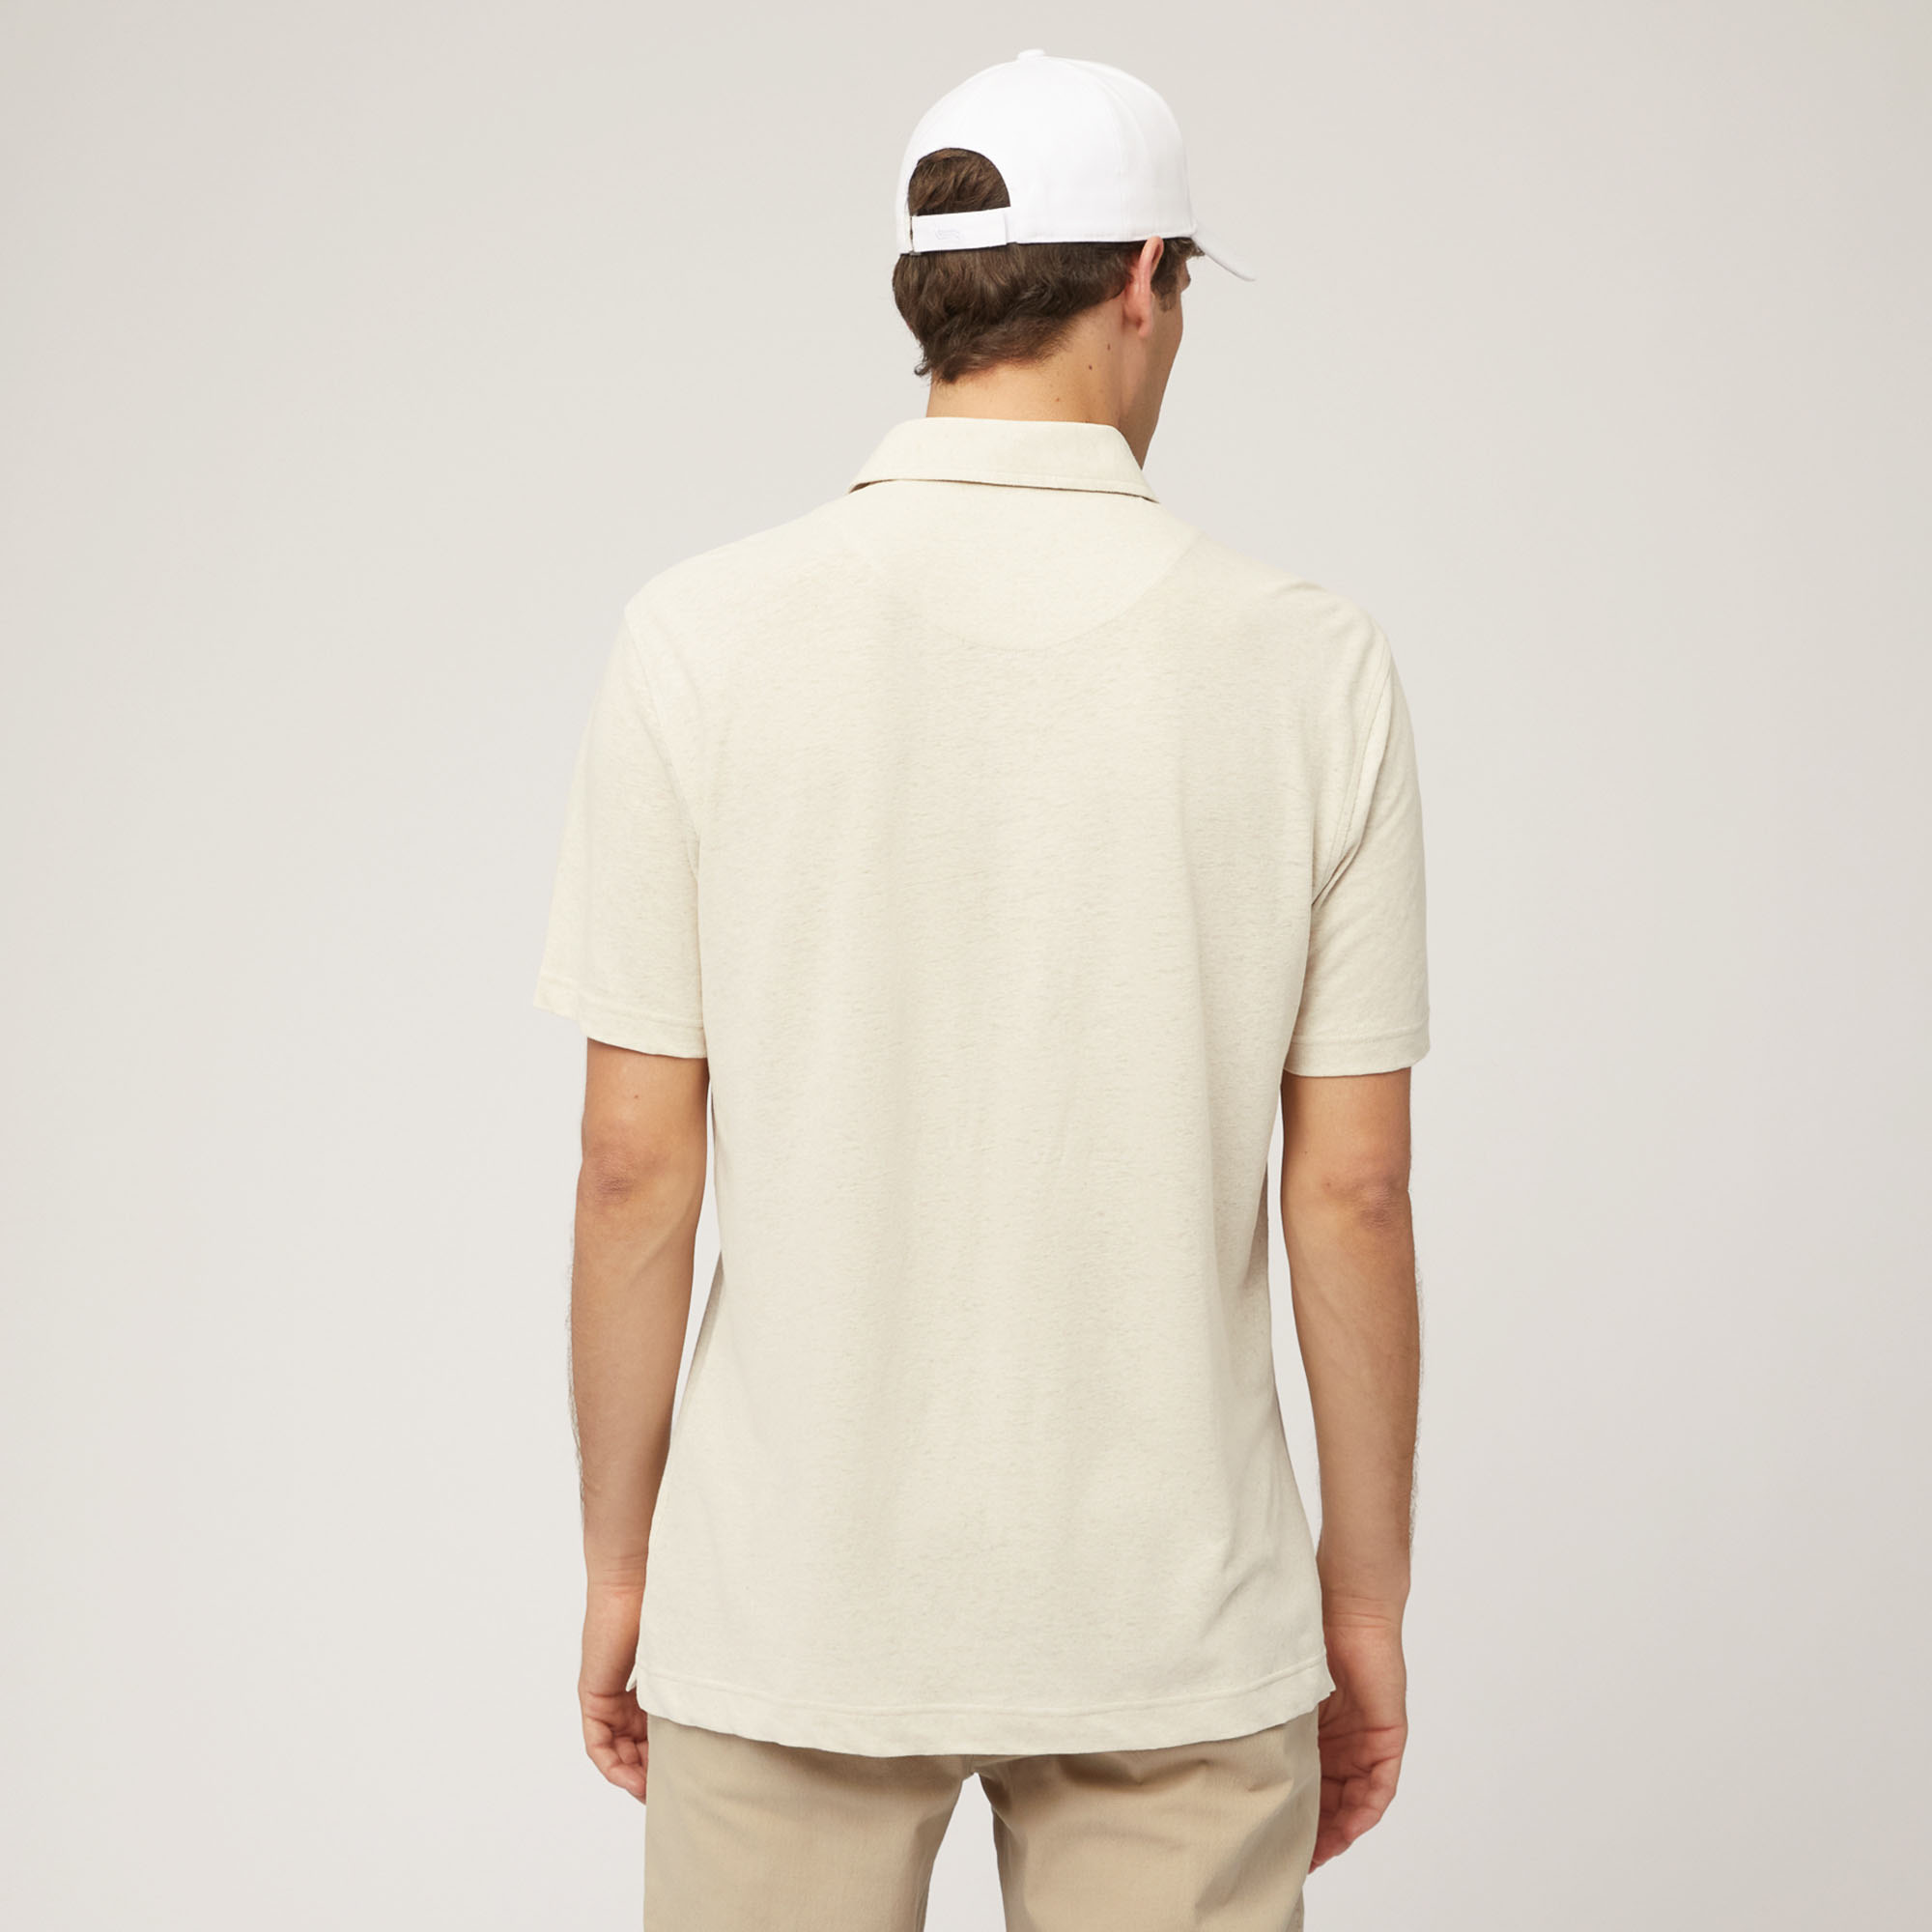 Cotton and Linen Jersey Polo, Beige, large image number 1